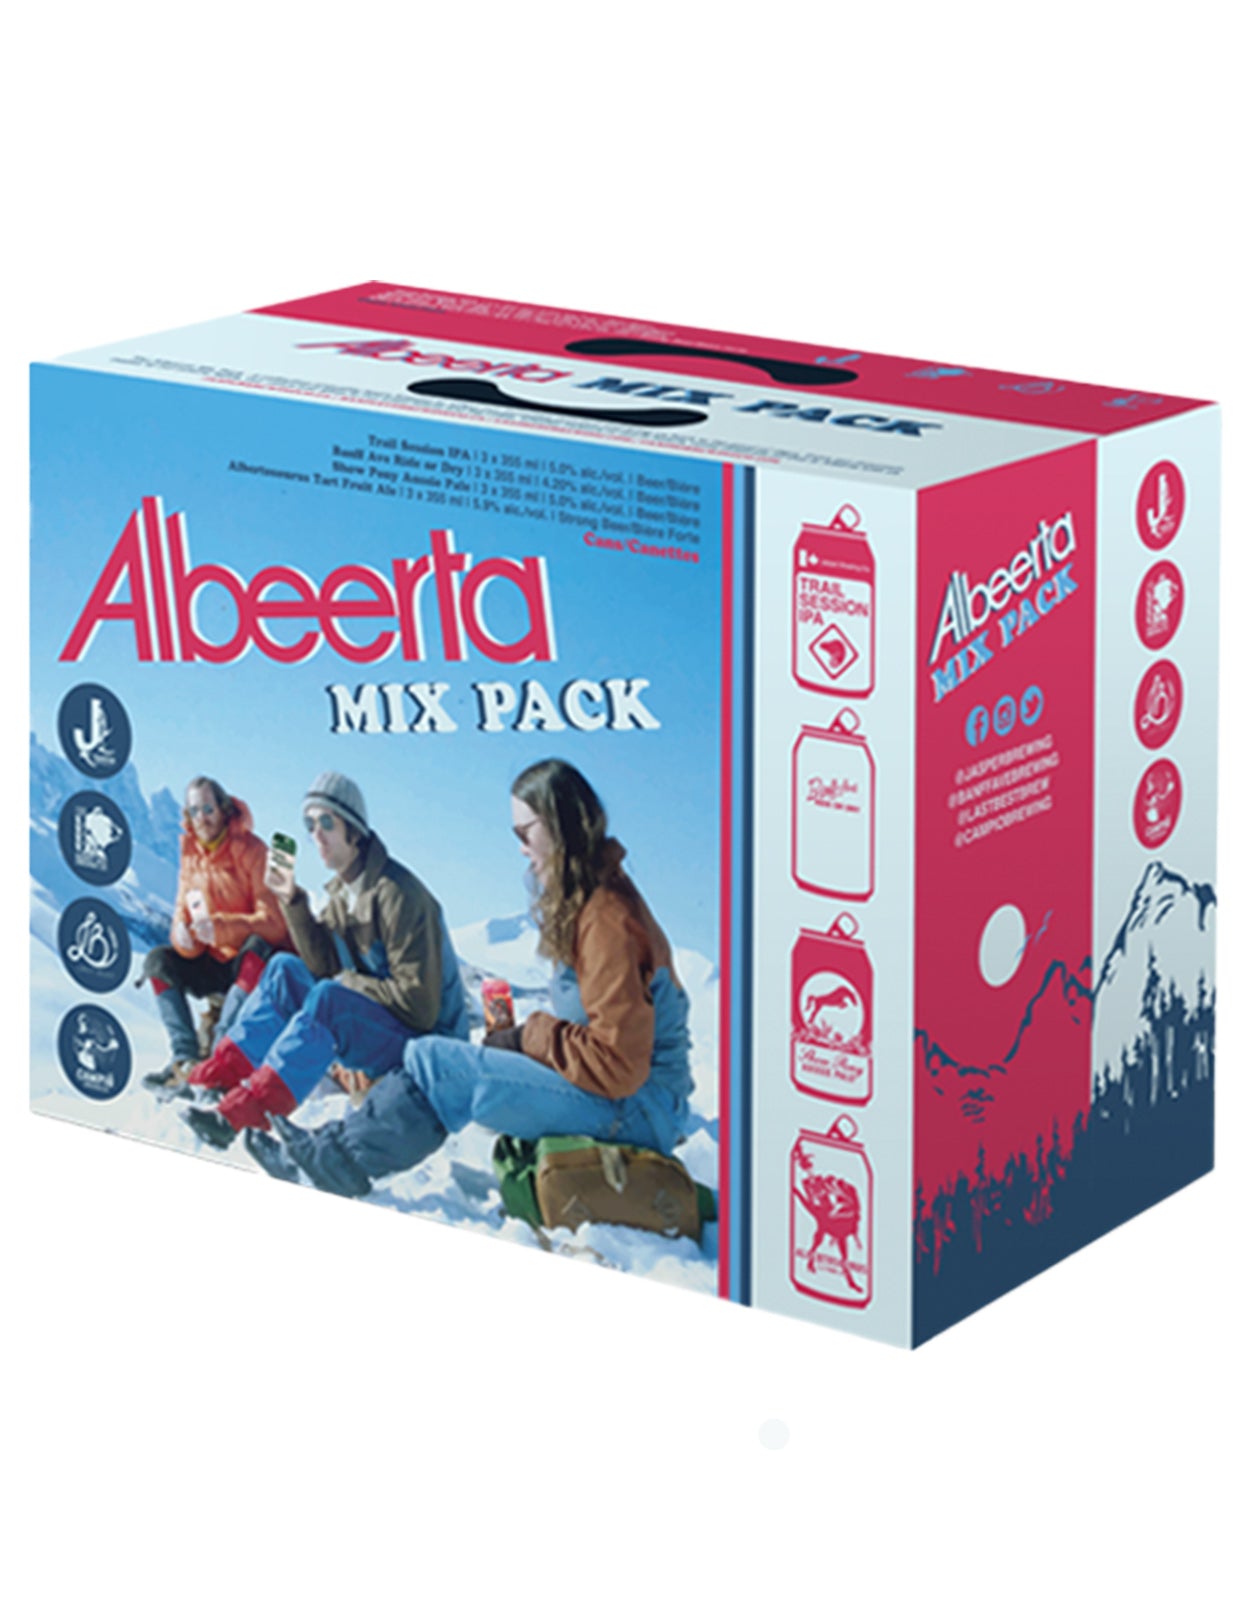 Albeerta Mixed Pack 355 ml - 12 Cans